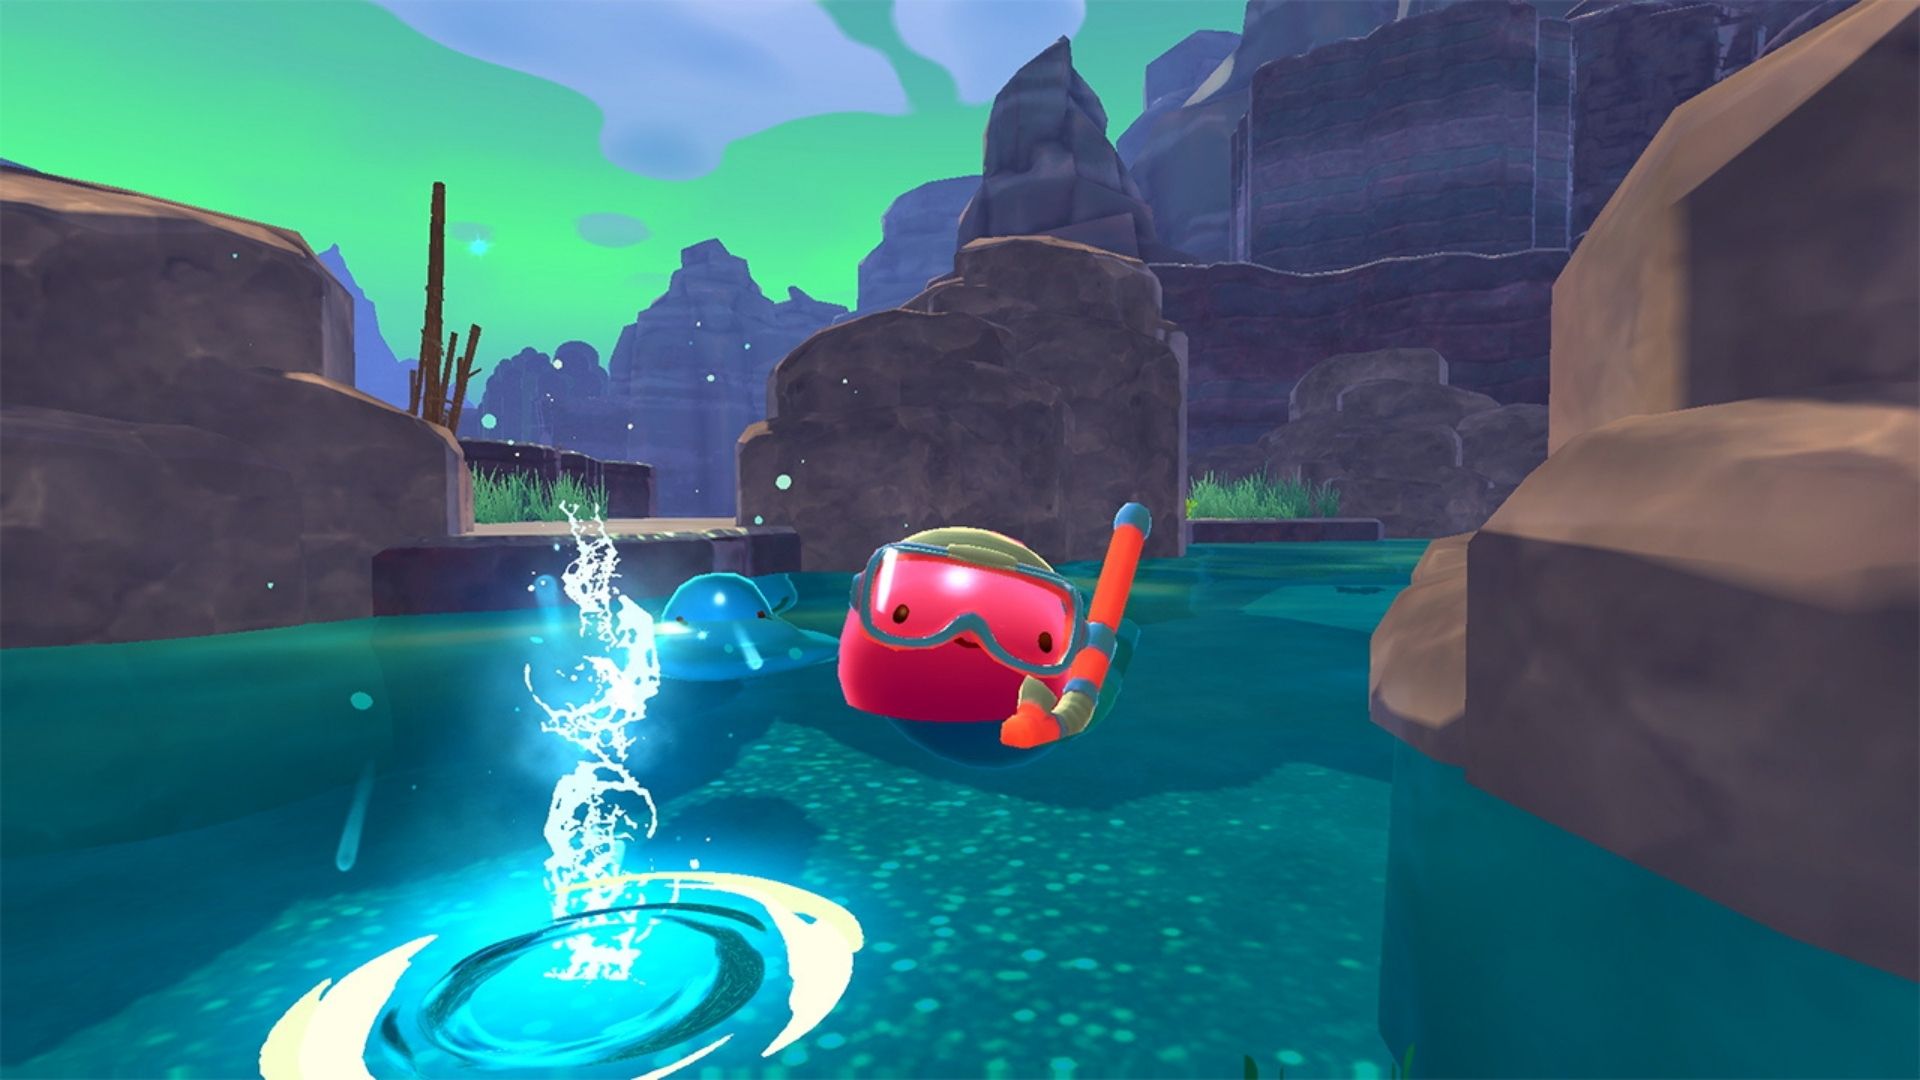 A screenshot from Slime Rancher showing a slime with water goggles on in a pool of water.